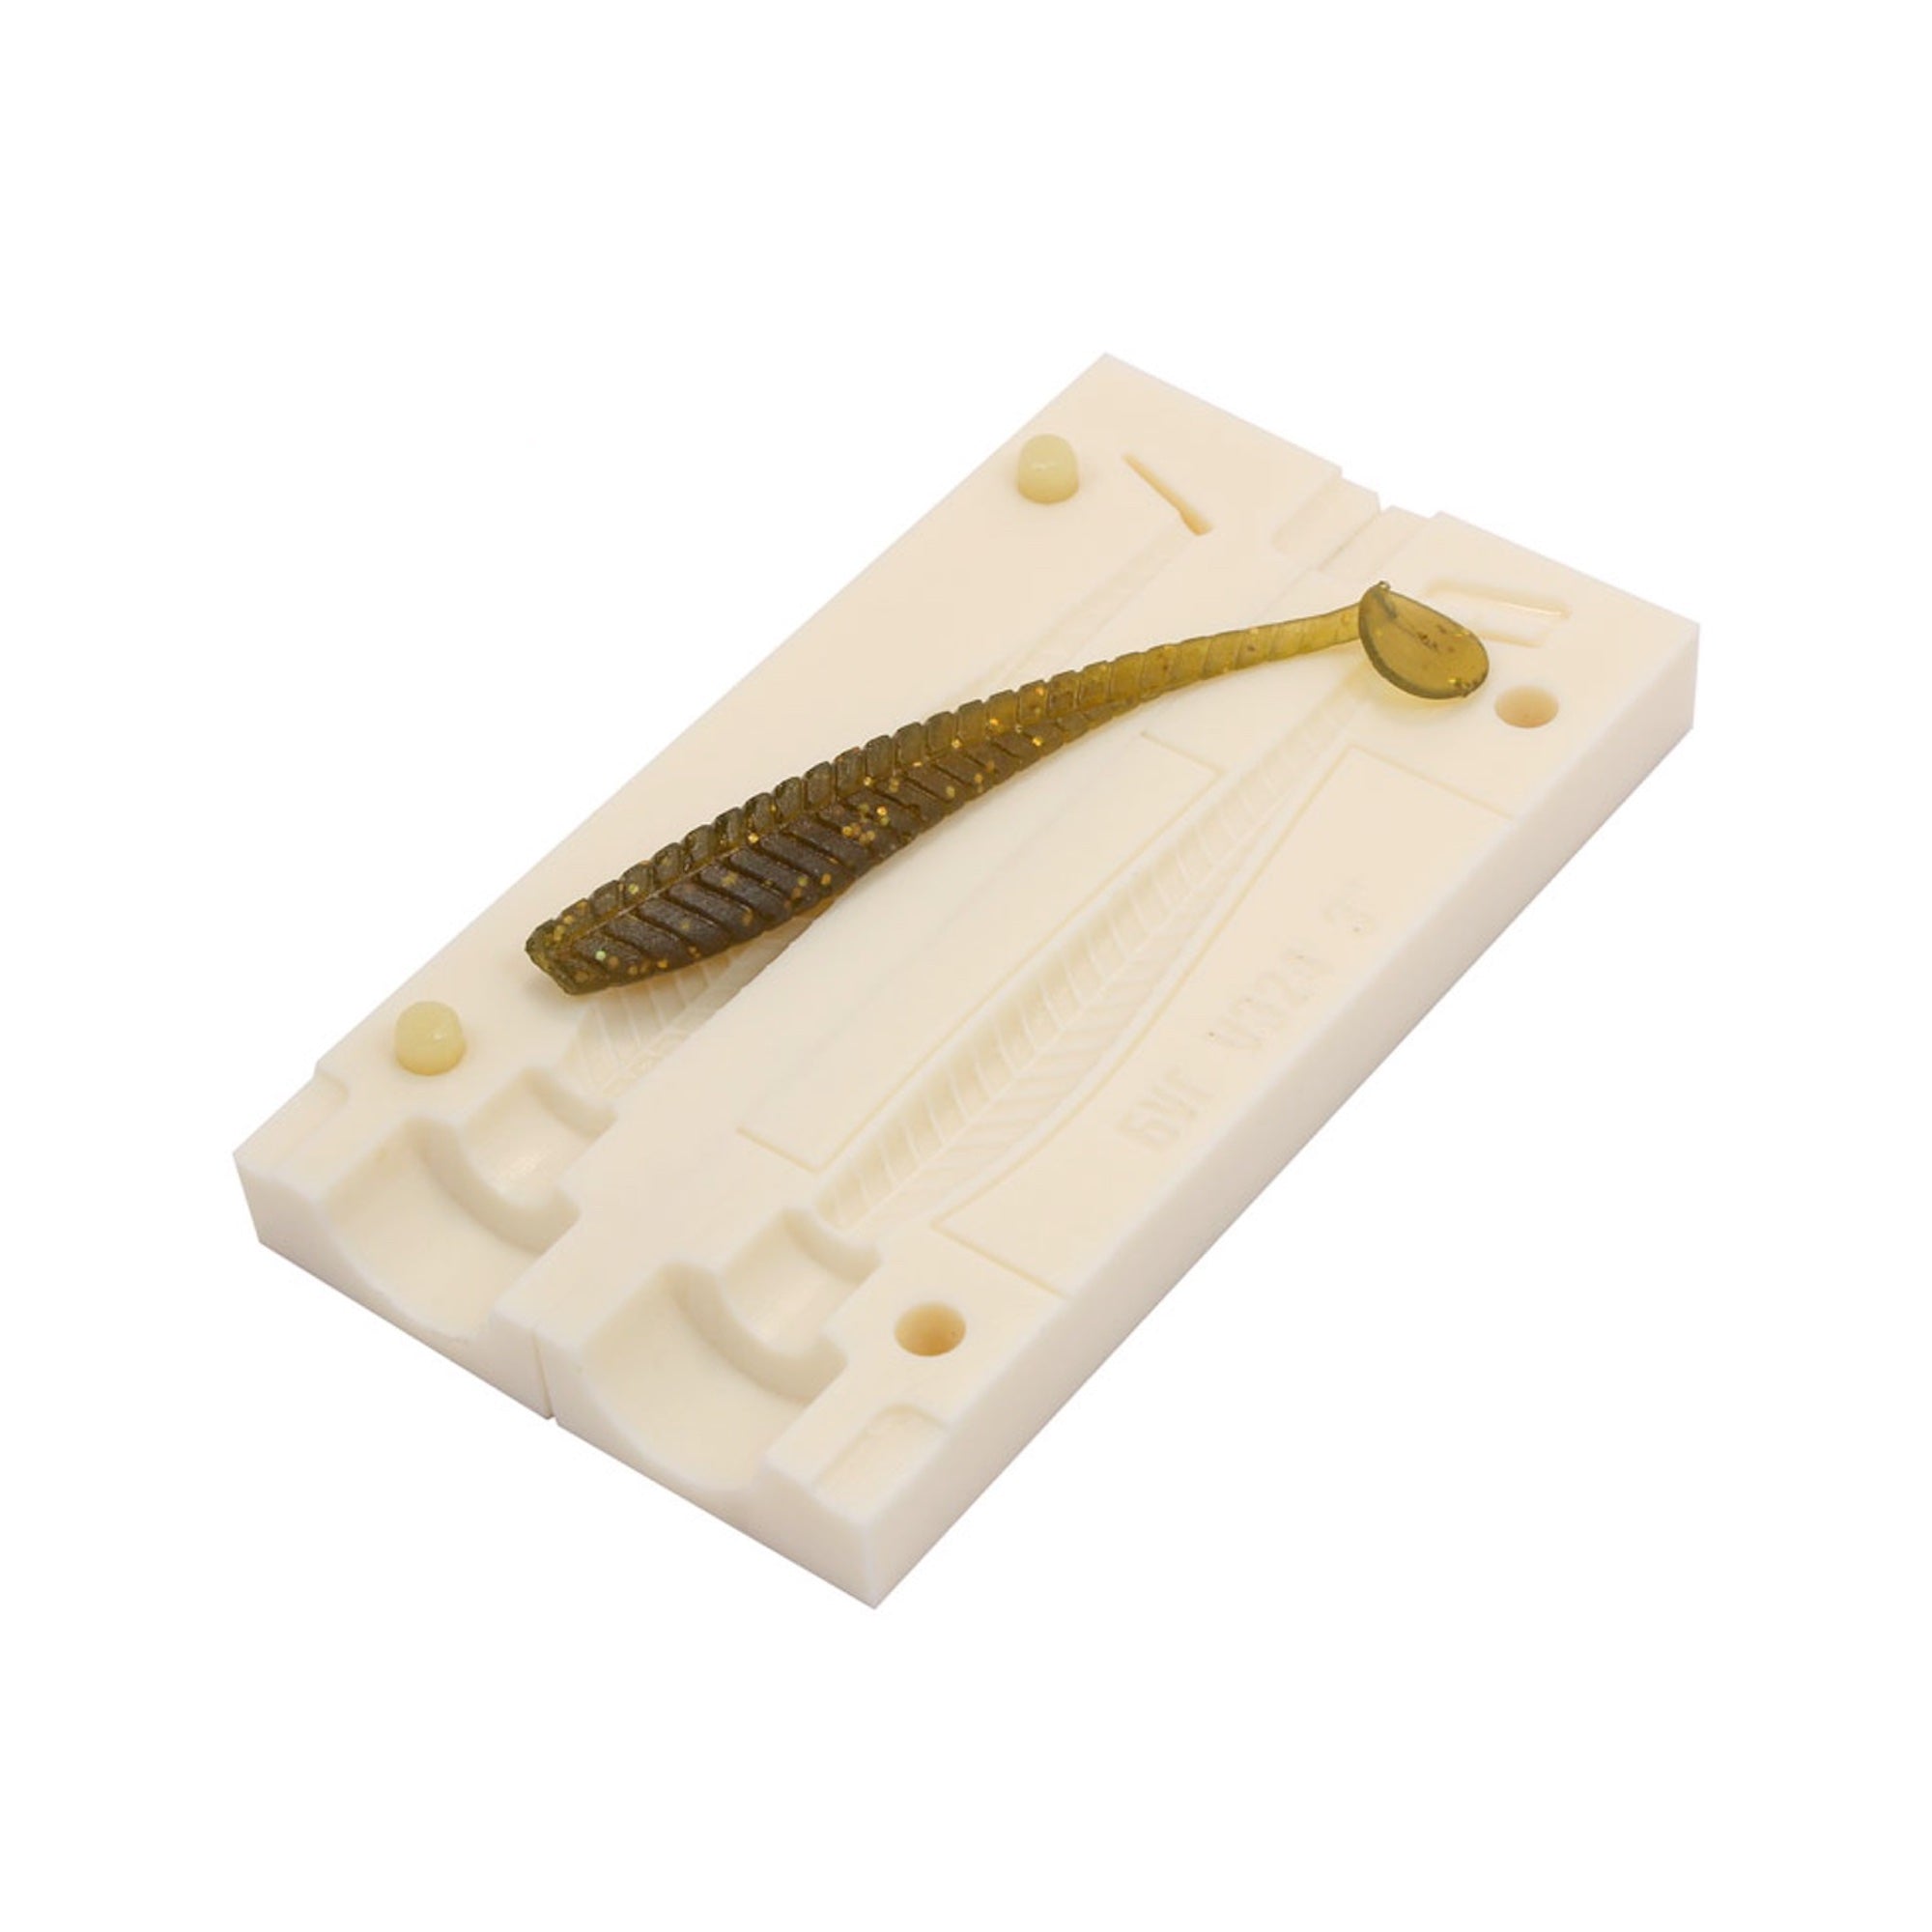 High quality stone mold to make your favorite soft lures